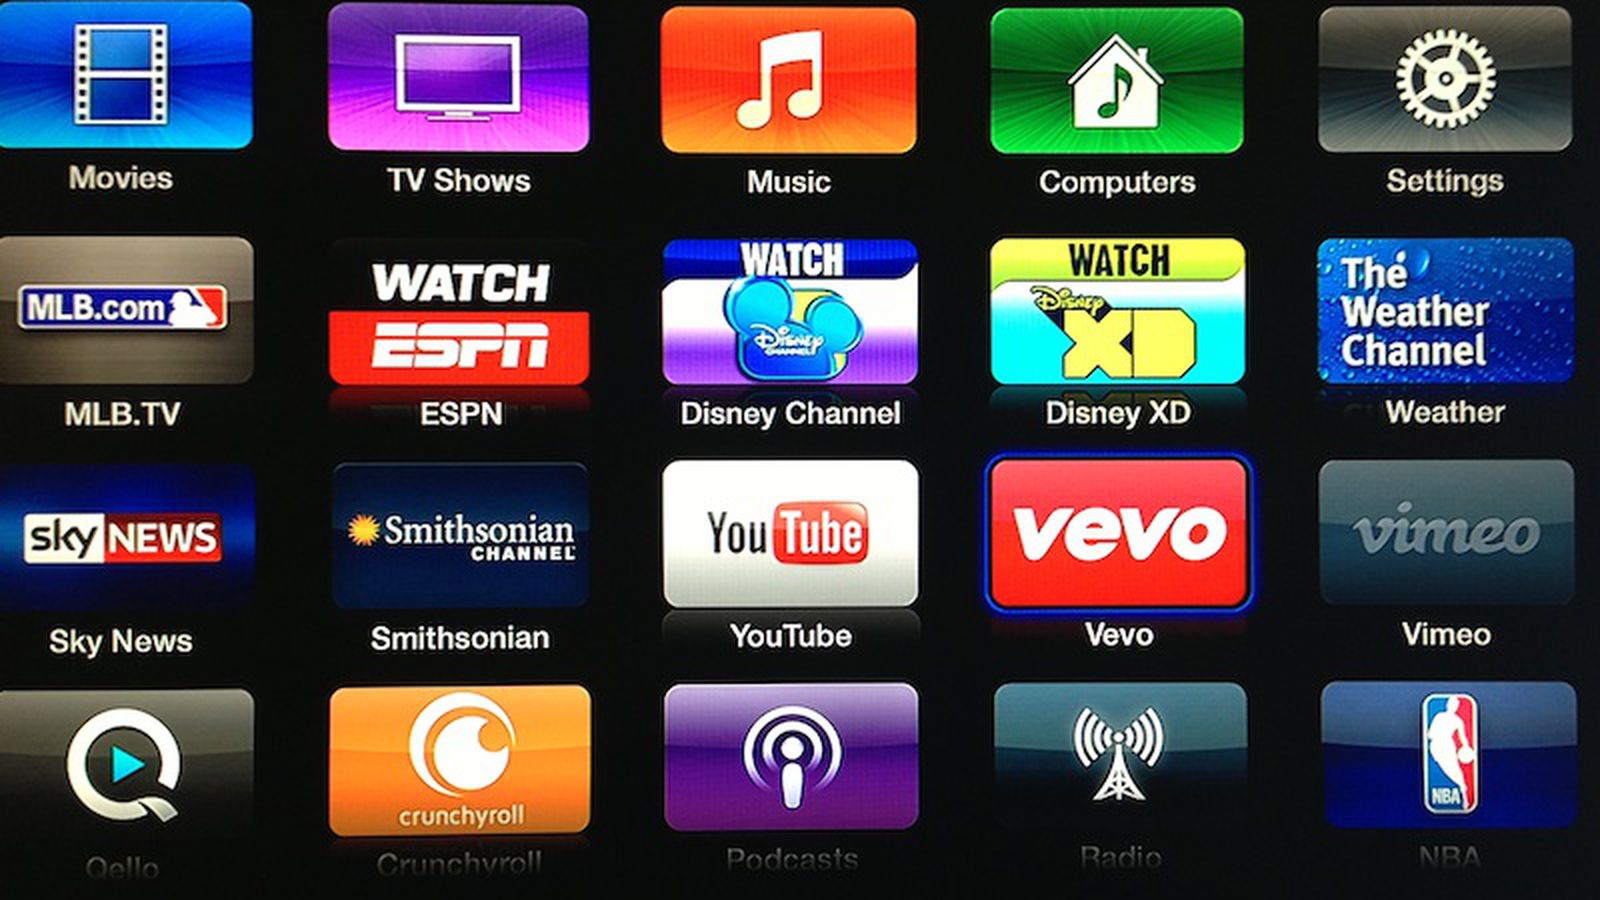 TV Adds Apps for Vevo, Weather Channel, Disney, and Channel - MacRumors